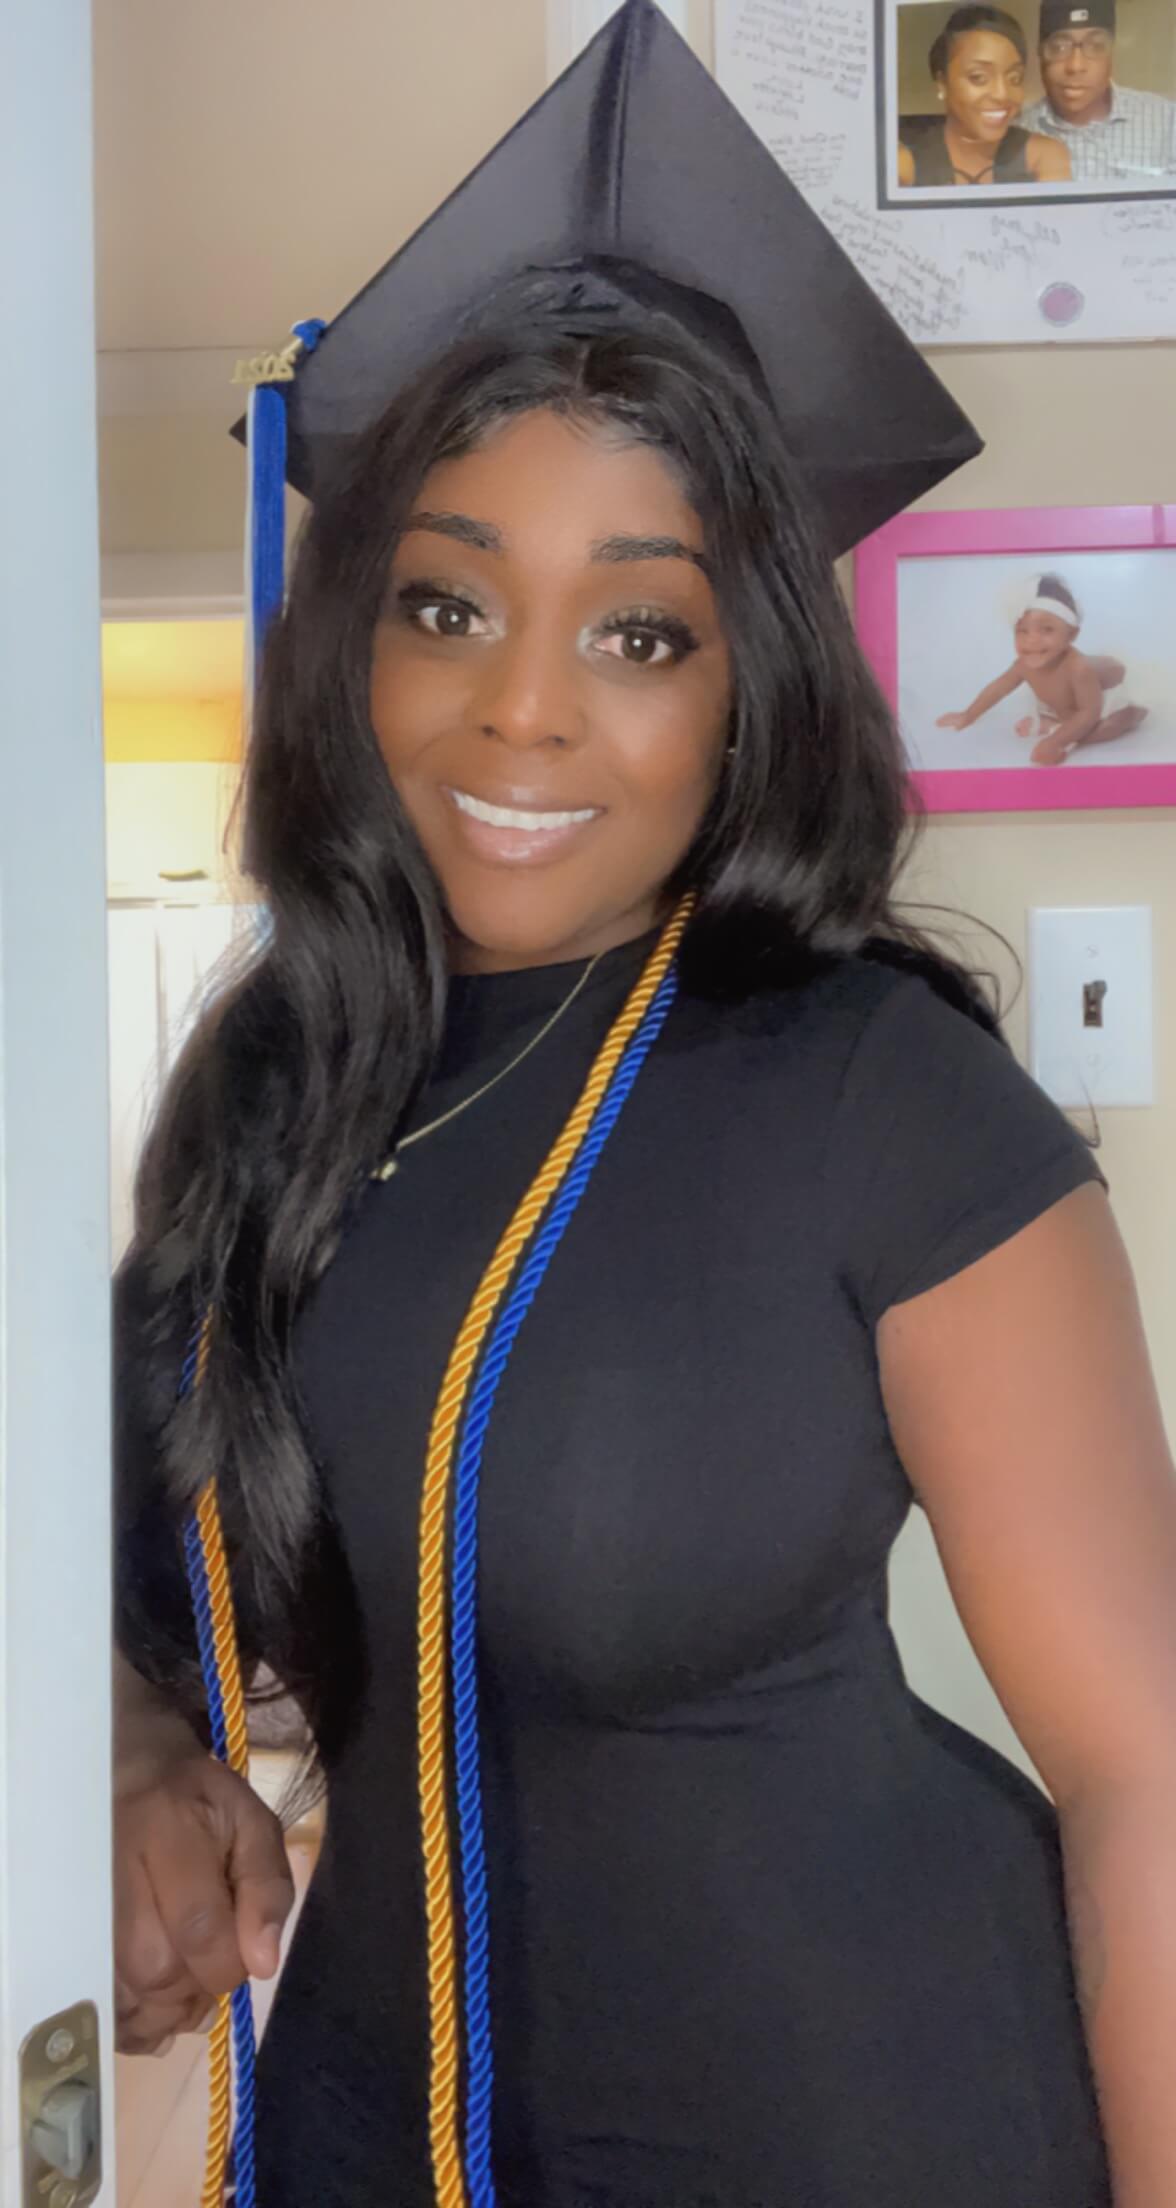  Image of Vanessa A. Starling-Roney, QCC Commencement 2021